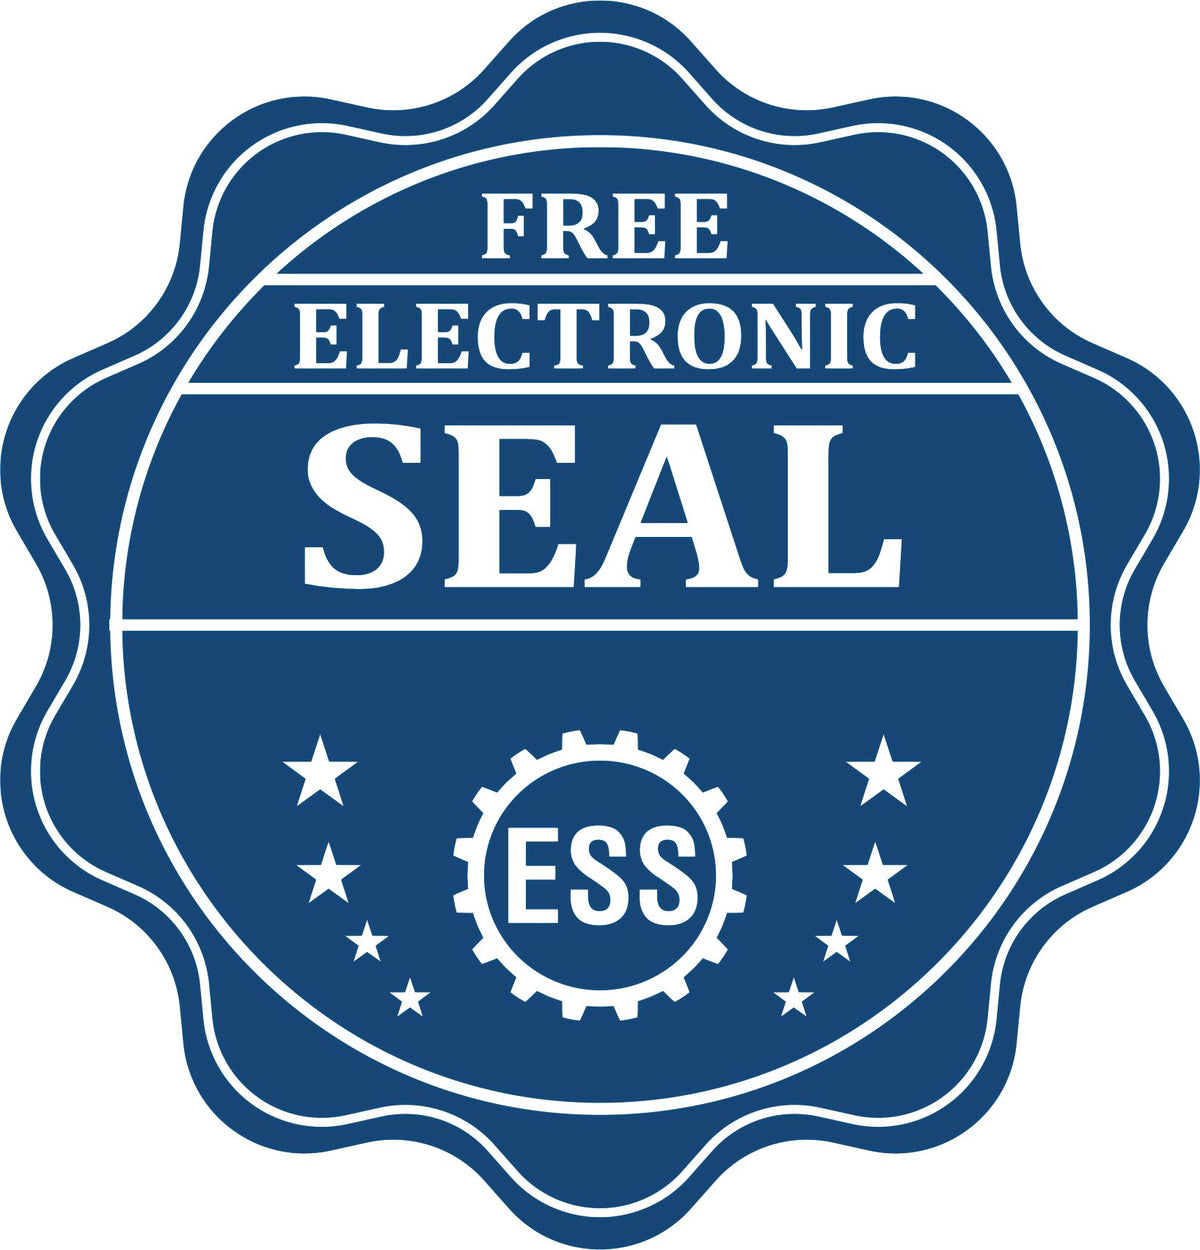 A badge showing a free electronic seal for the Super Slim Oklahoma Notary Public Stamp with stars and the ESS gear on the emblem.